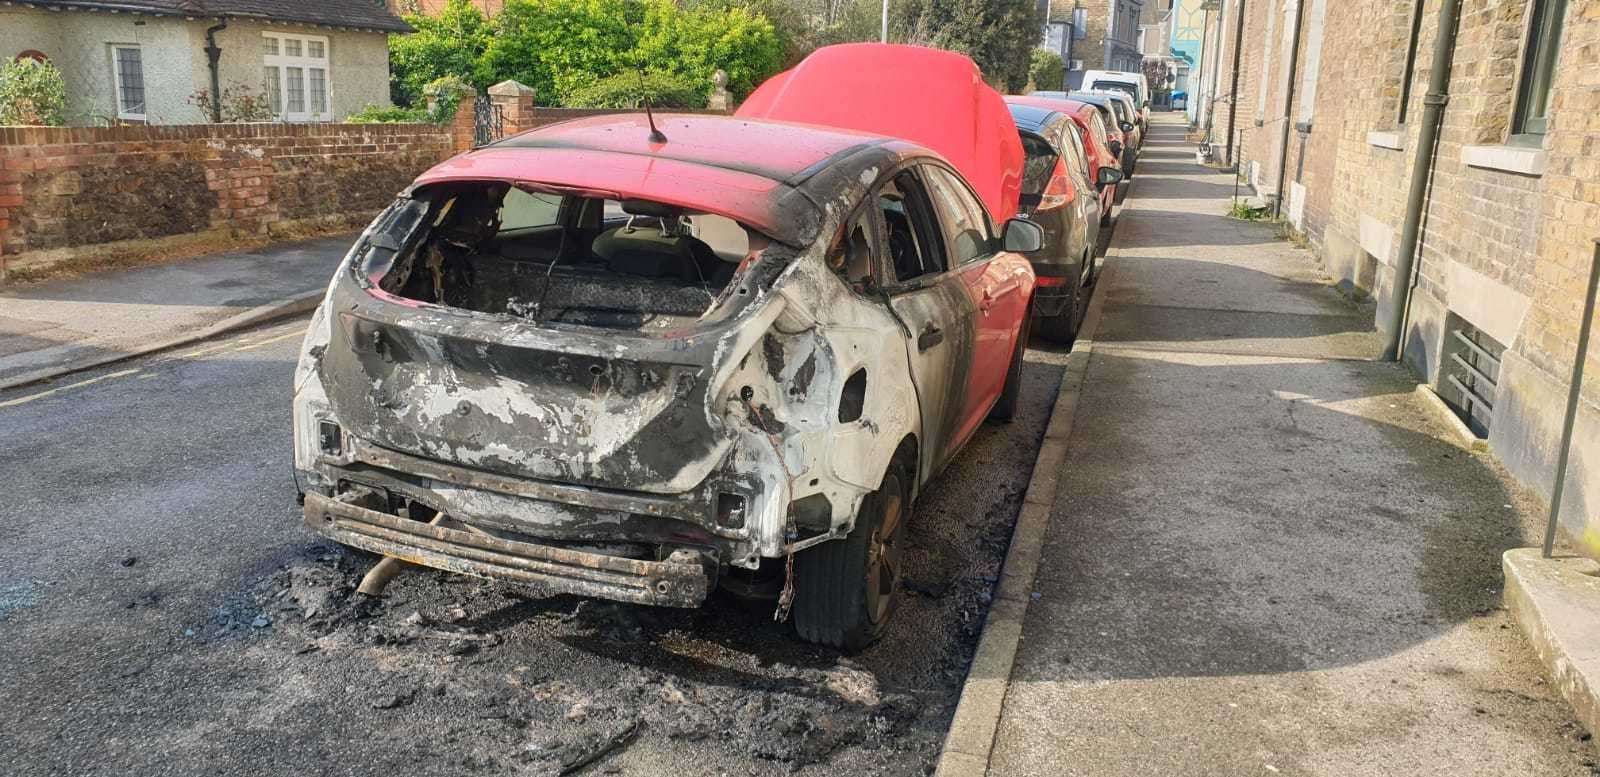 Paul Cooper's red Ford Focus was one of the vehicles targeted